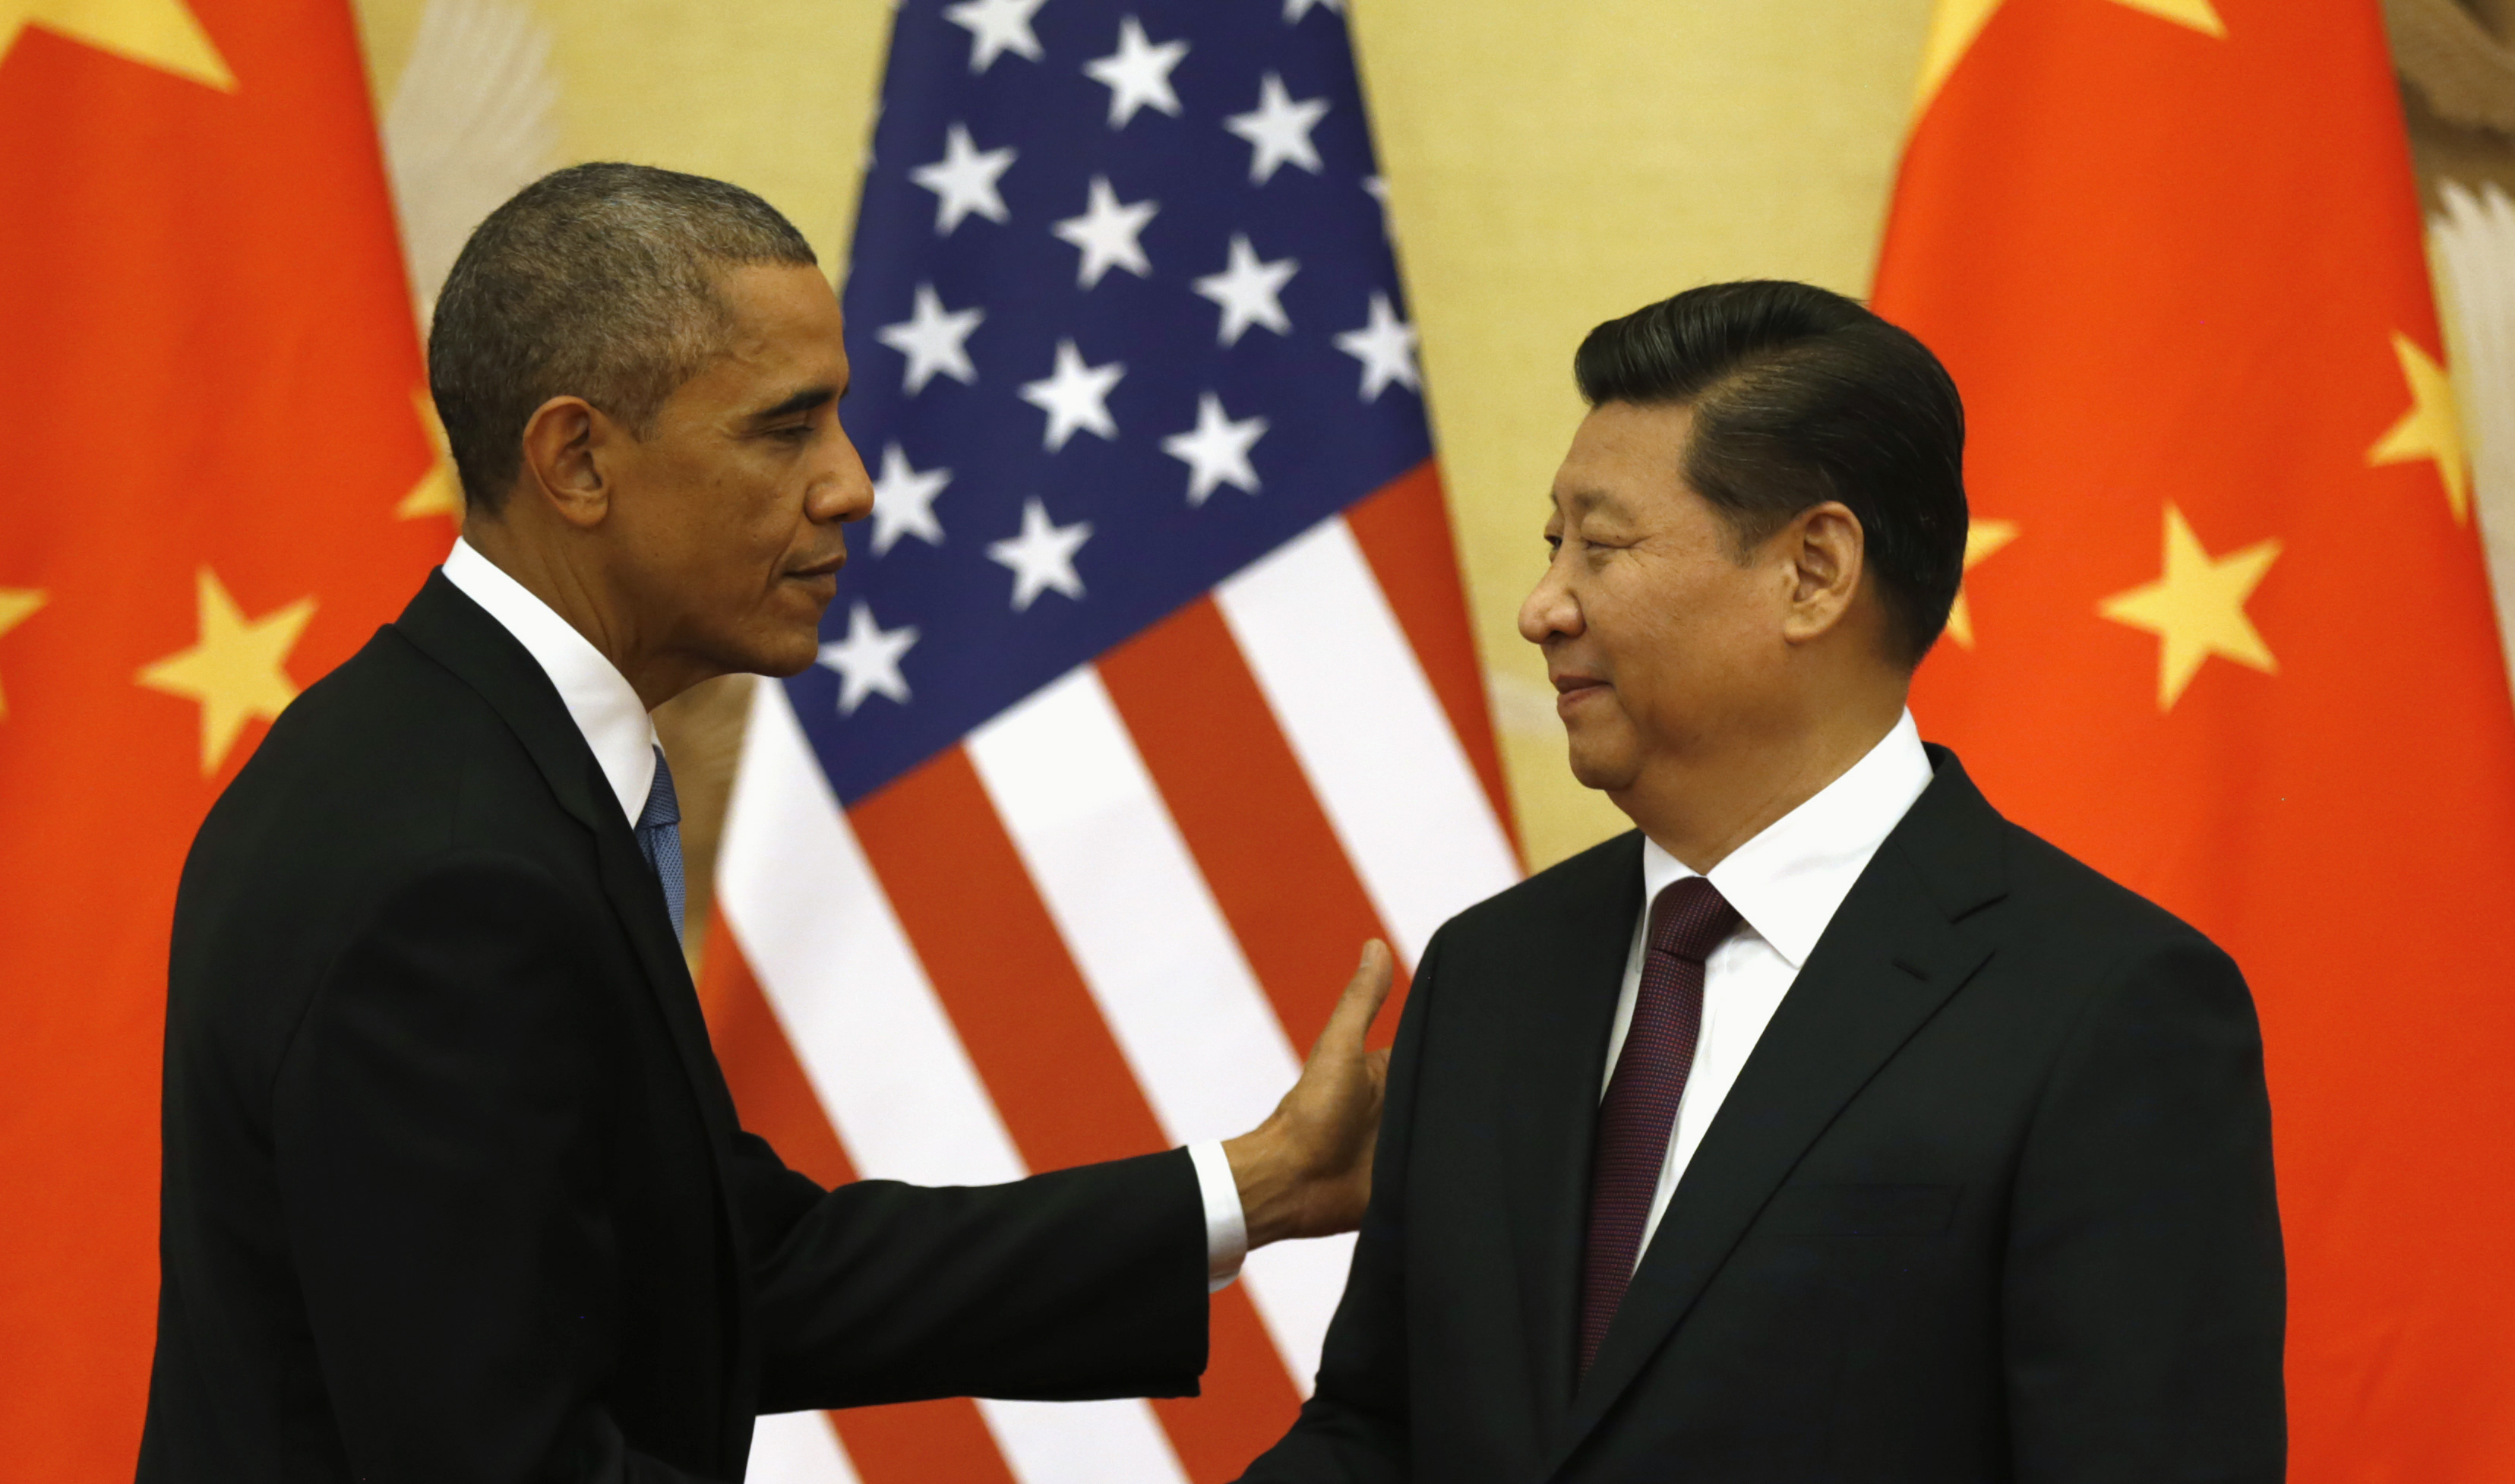 Obama pats Xi on the shoulder at the end of their news conference in the Great Hall of the People in Beijing